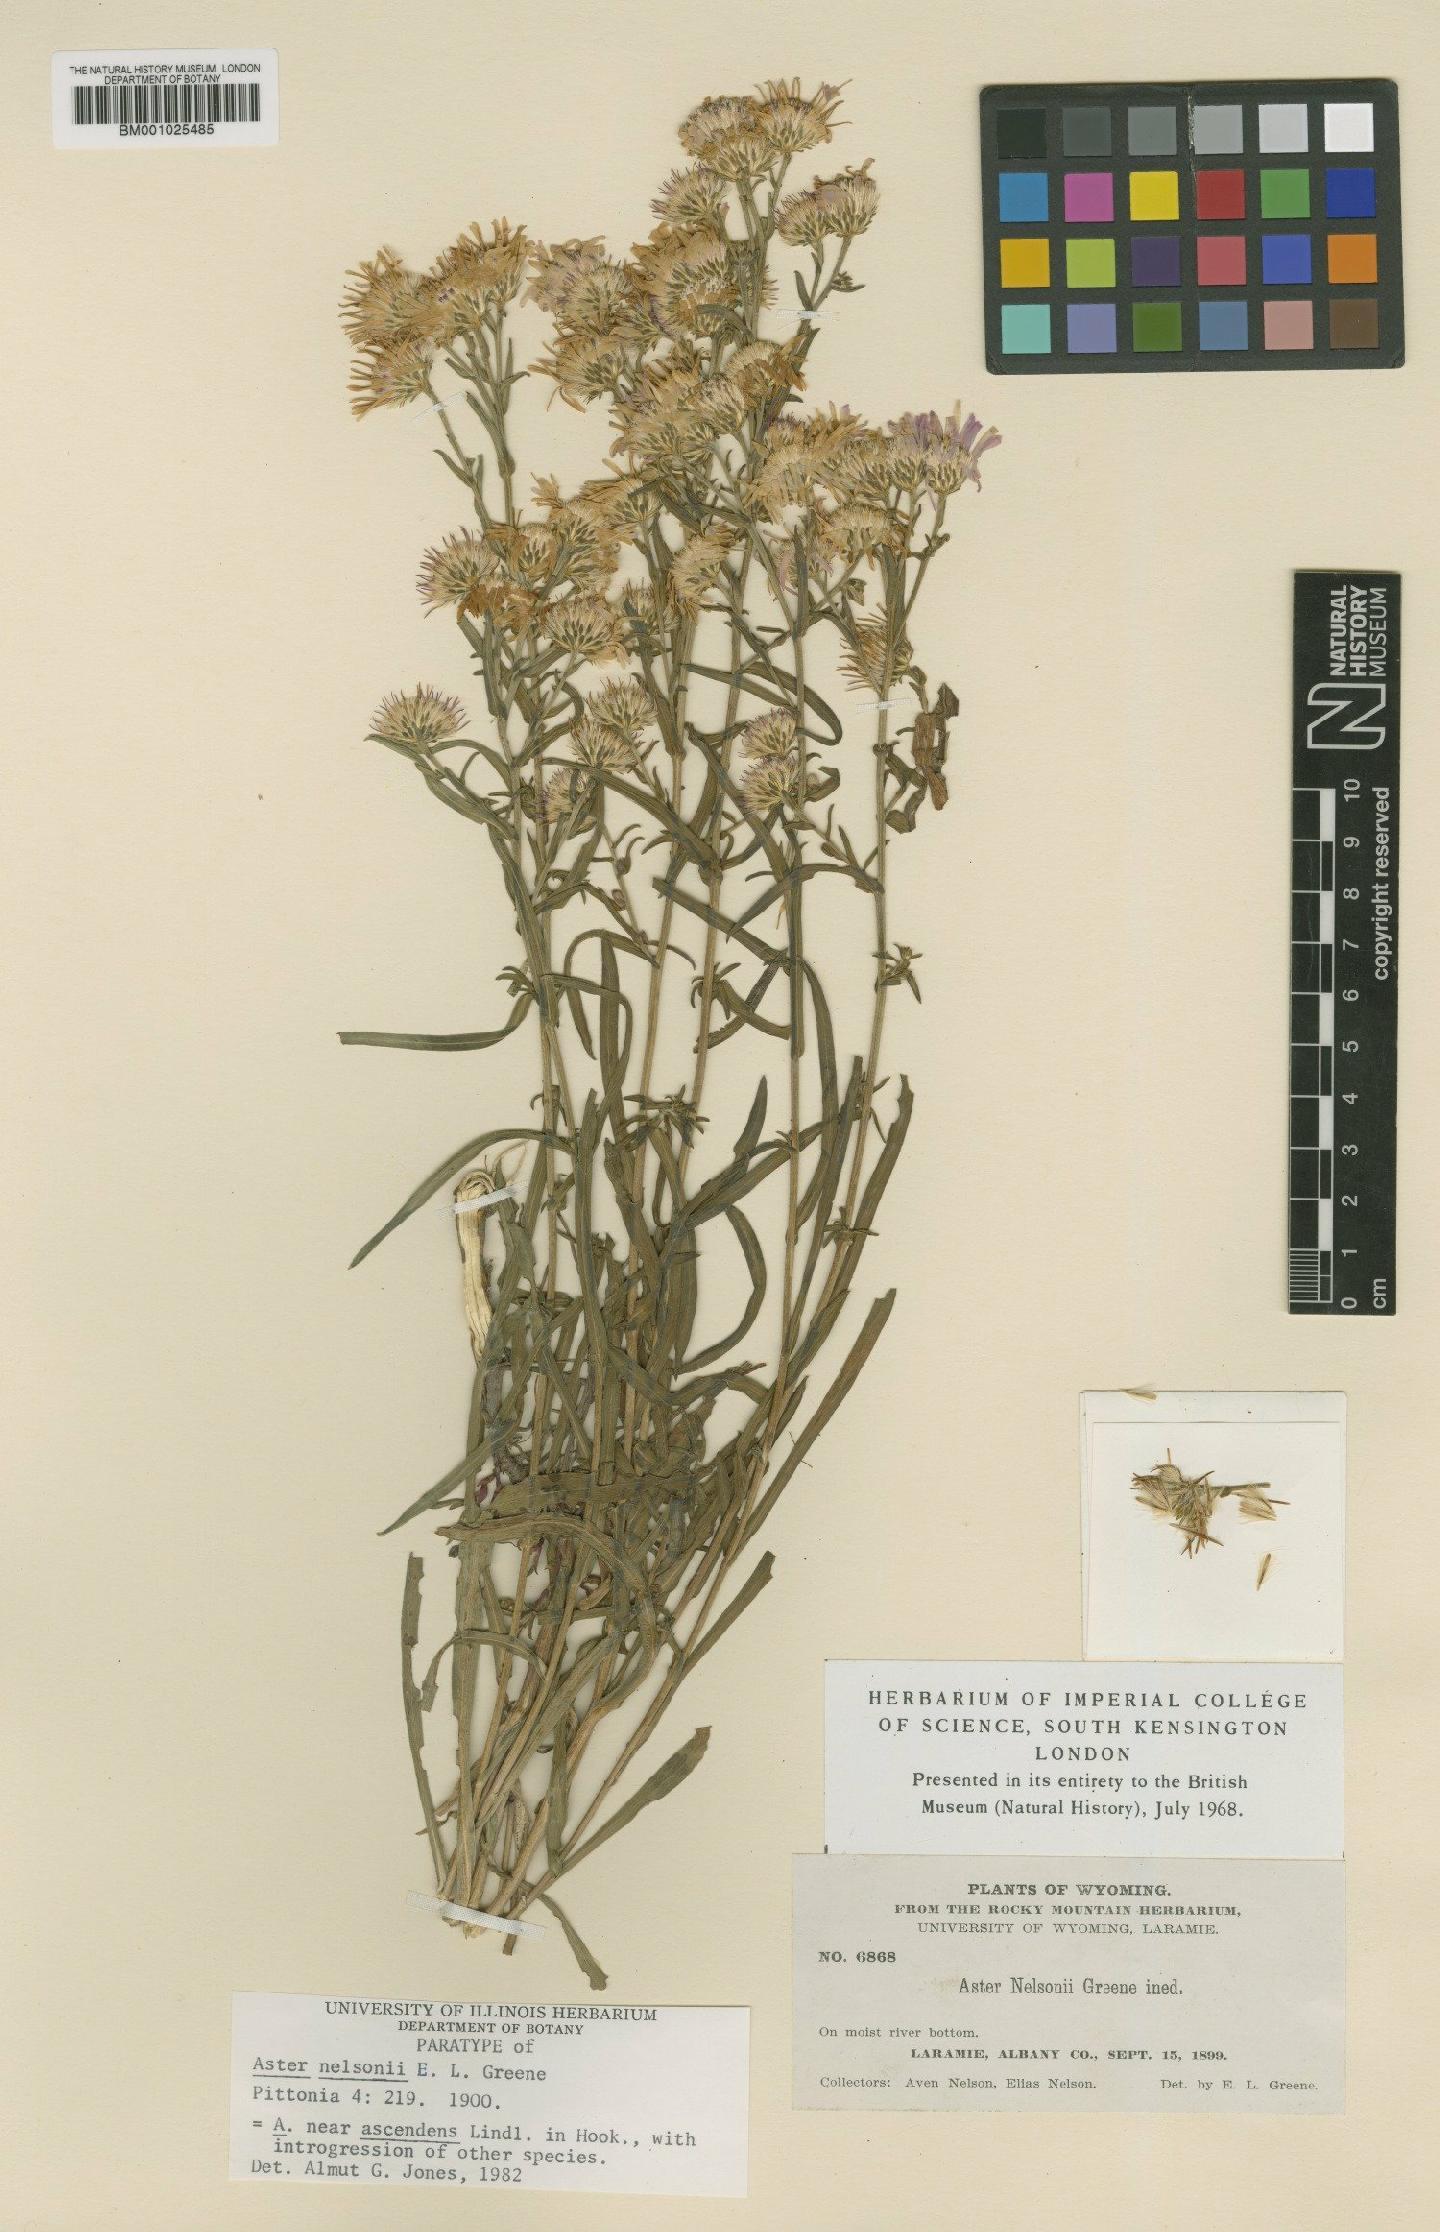 To NHMUK collection (Aster nelsonii Greene; Type; NHMUK:ecatalogue:1090078)